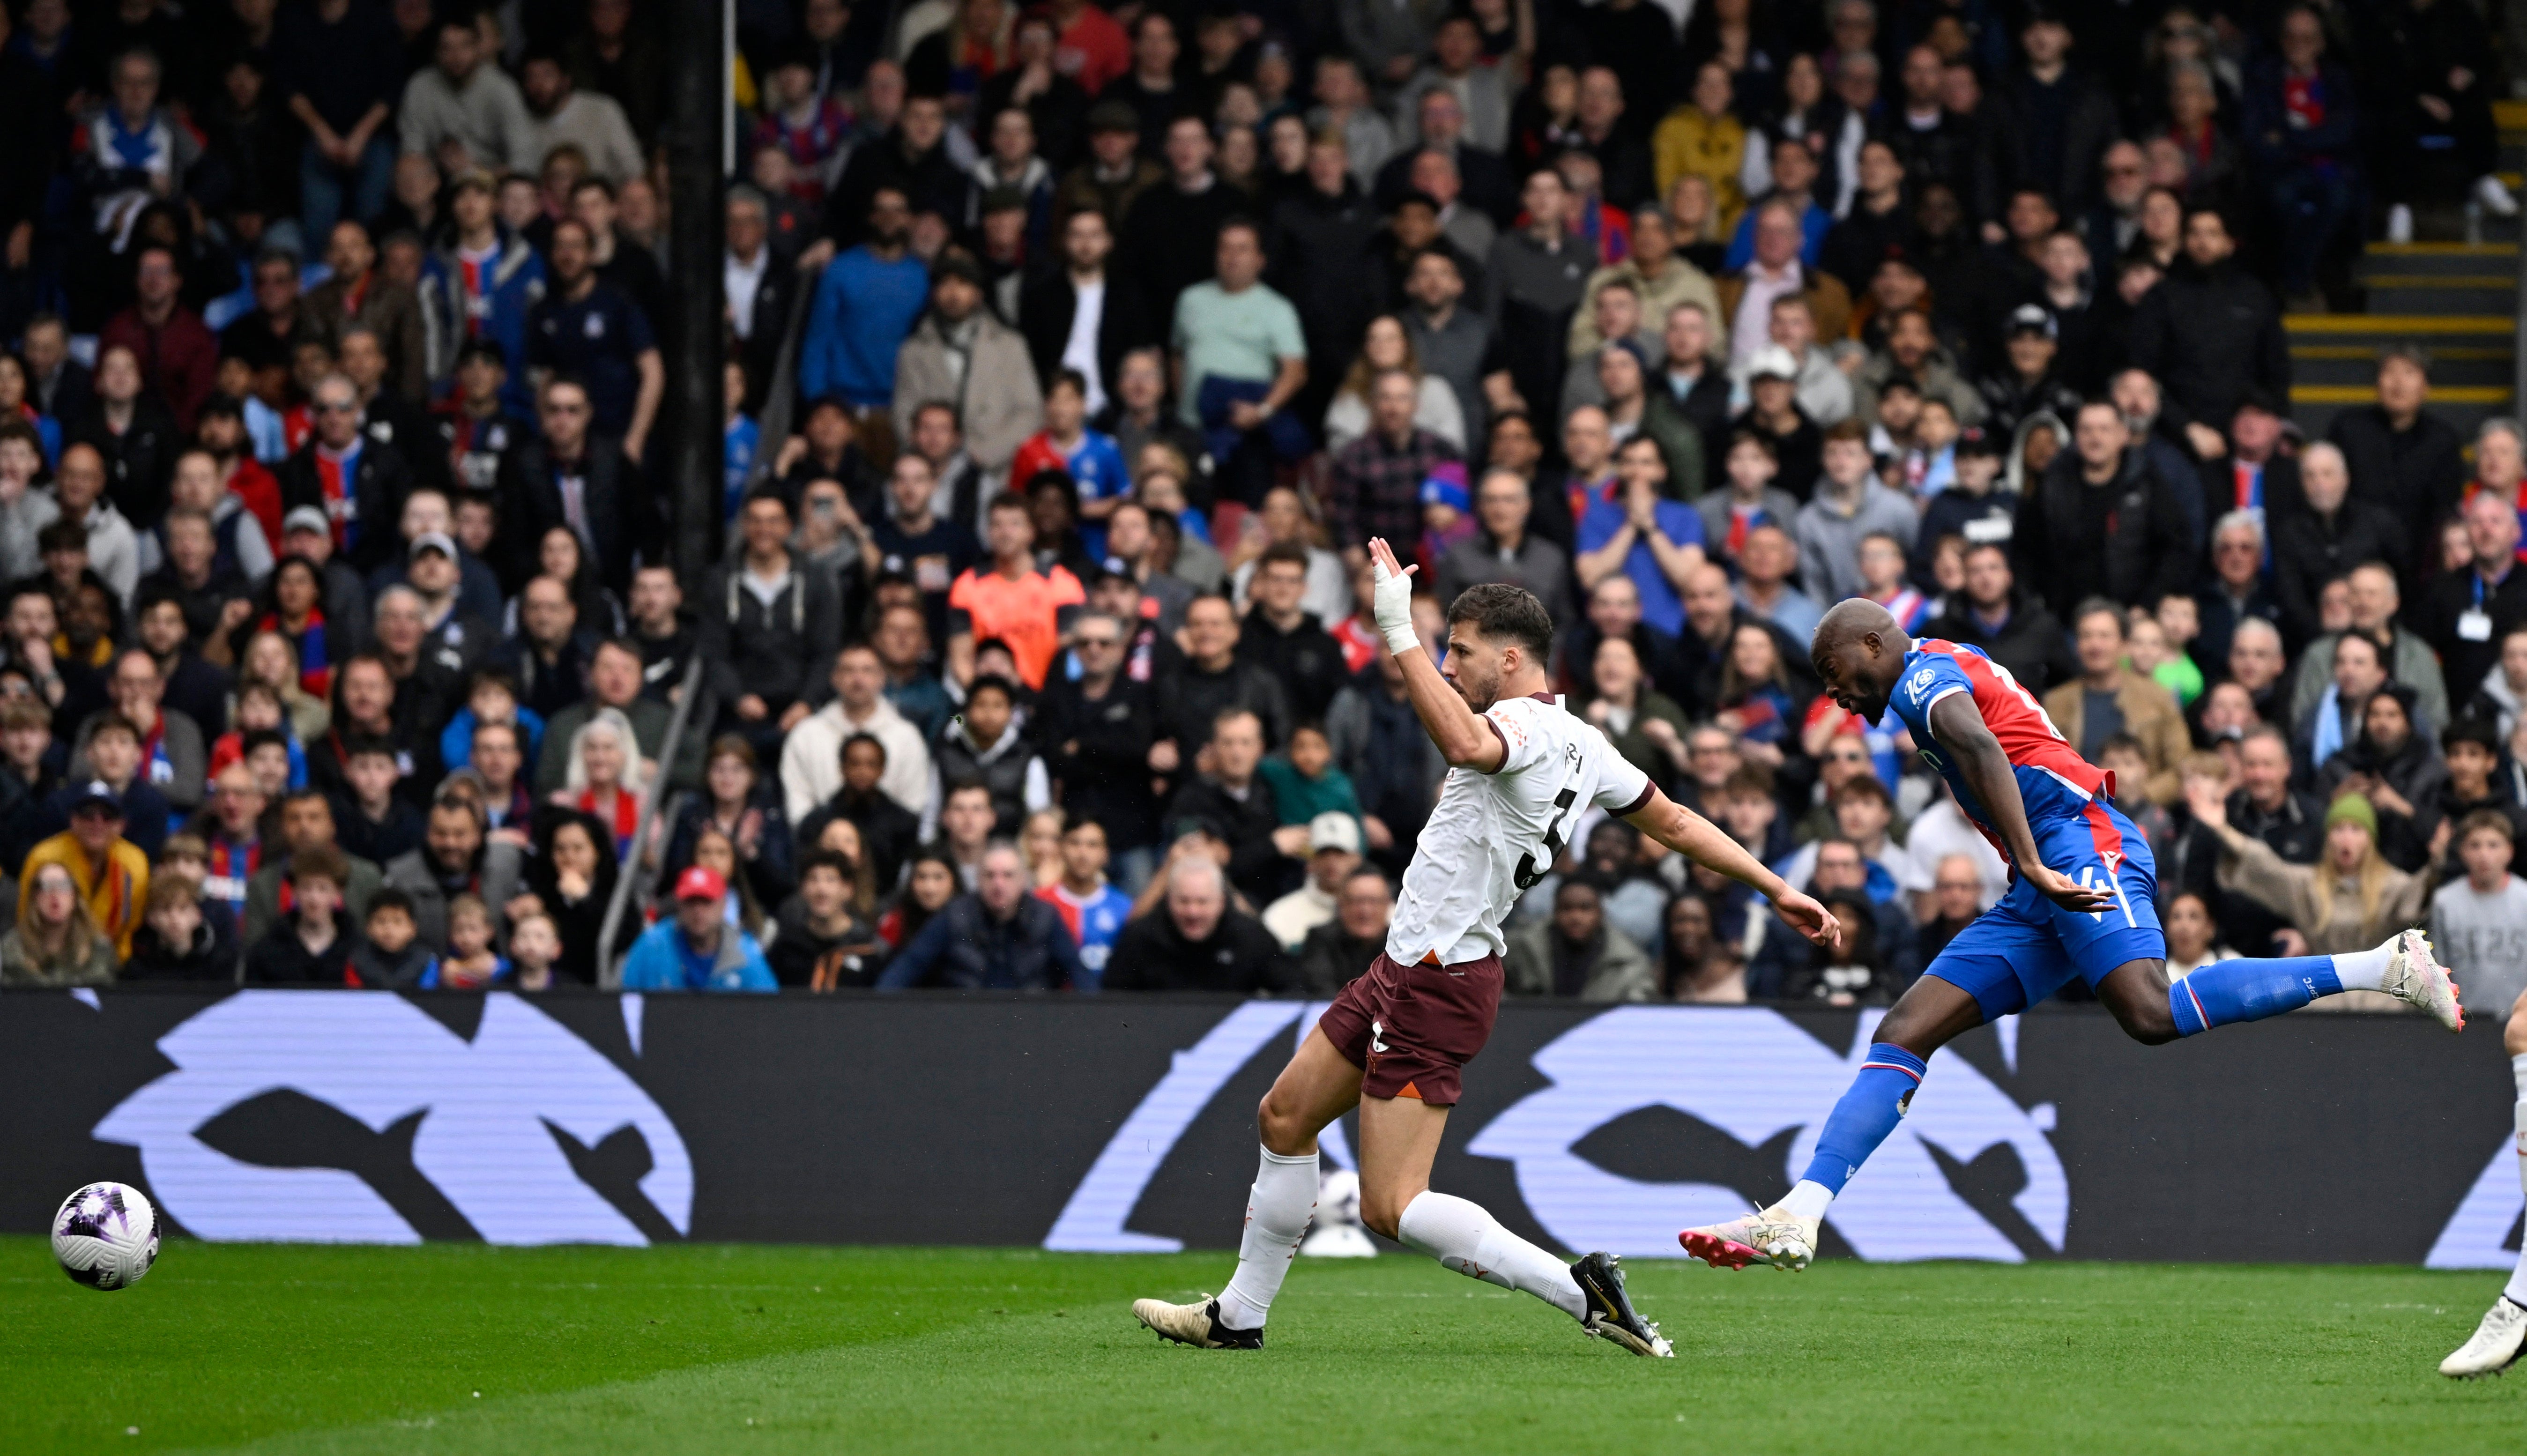 Jean-Philippe Mateta’s goal gave Palace an early lead at Selhurst Park